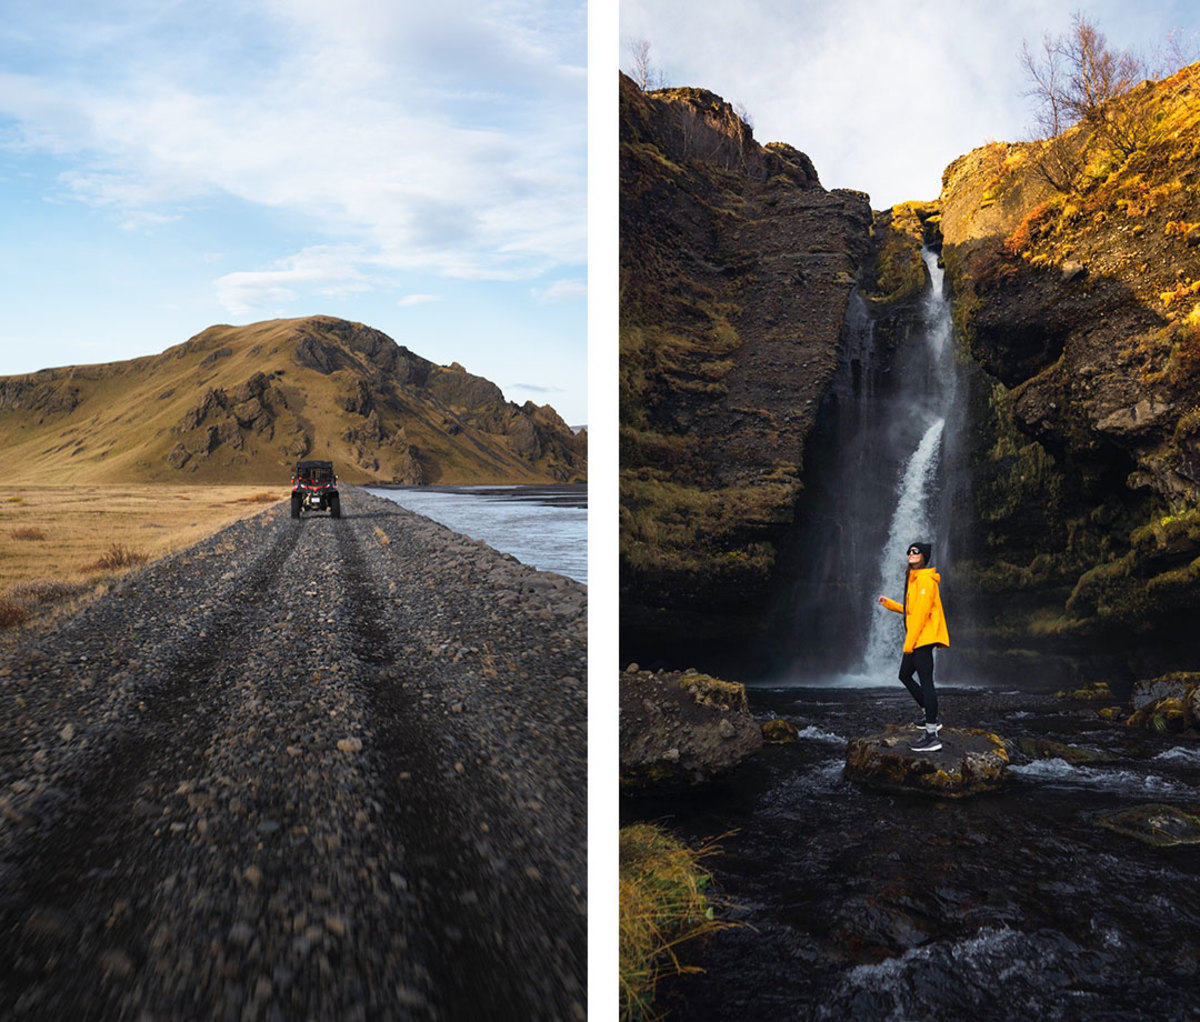 Southcoast Adventure Buggy Tour, with a pitstop at Gluggafoss (waterfall)